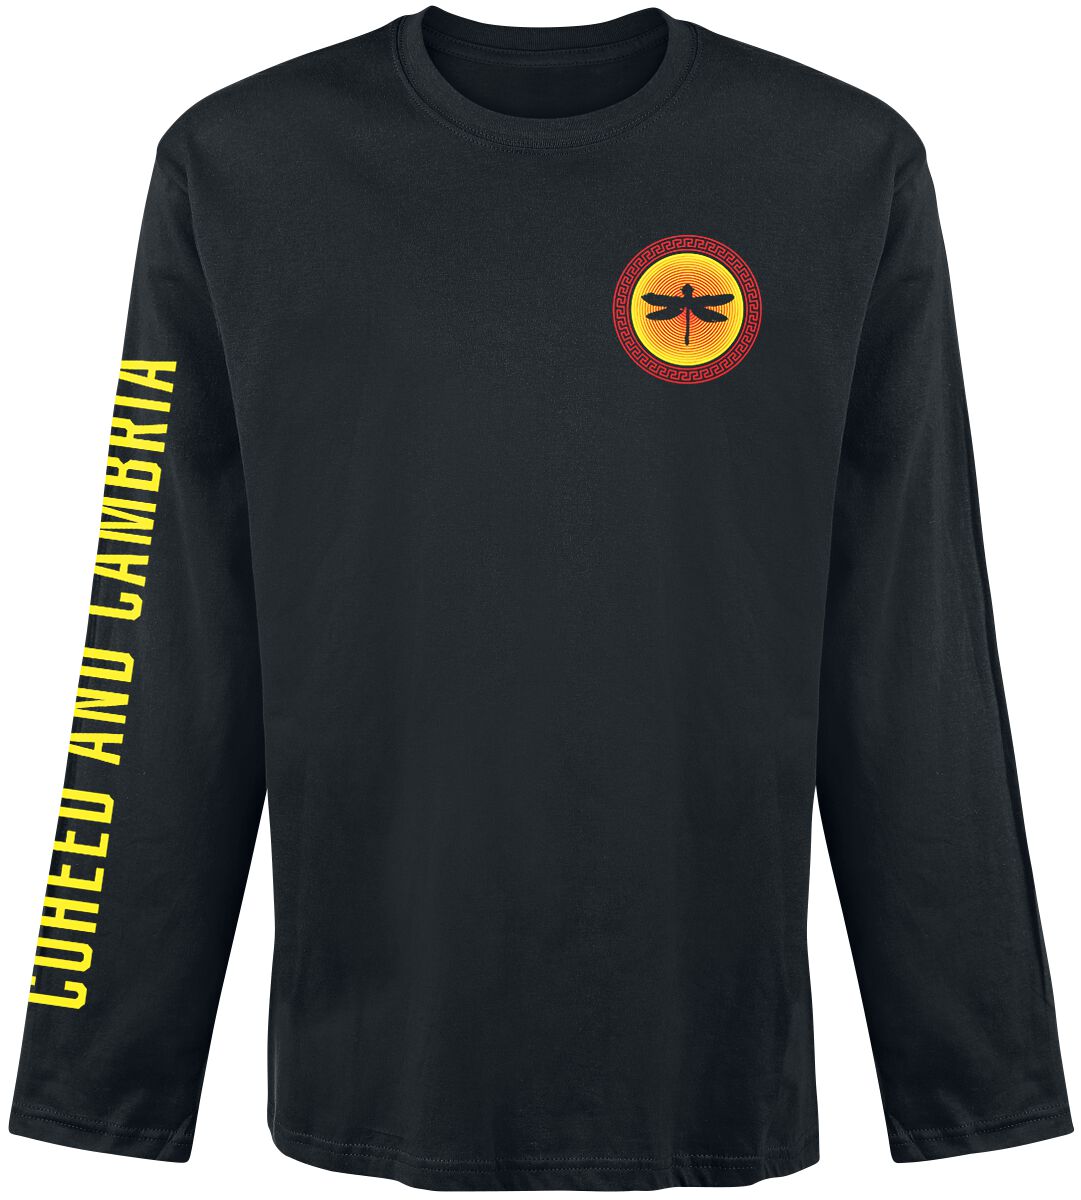 Coheed And Cambria Triverse Long-sleeve Shirt black